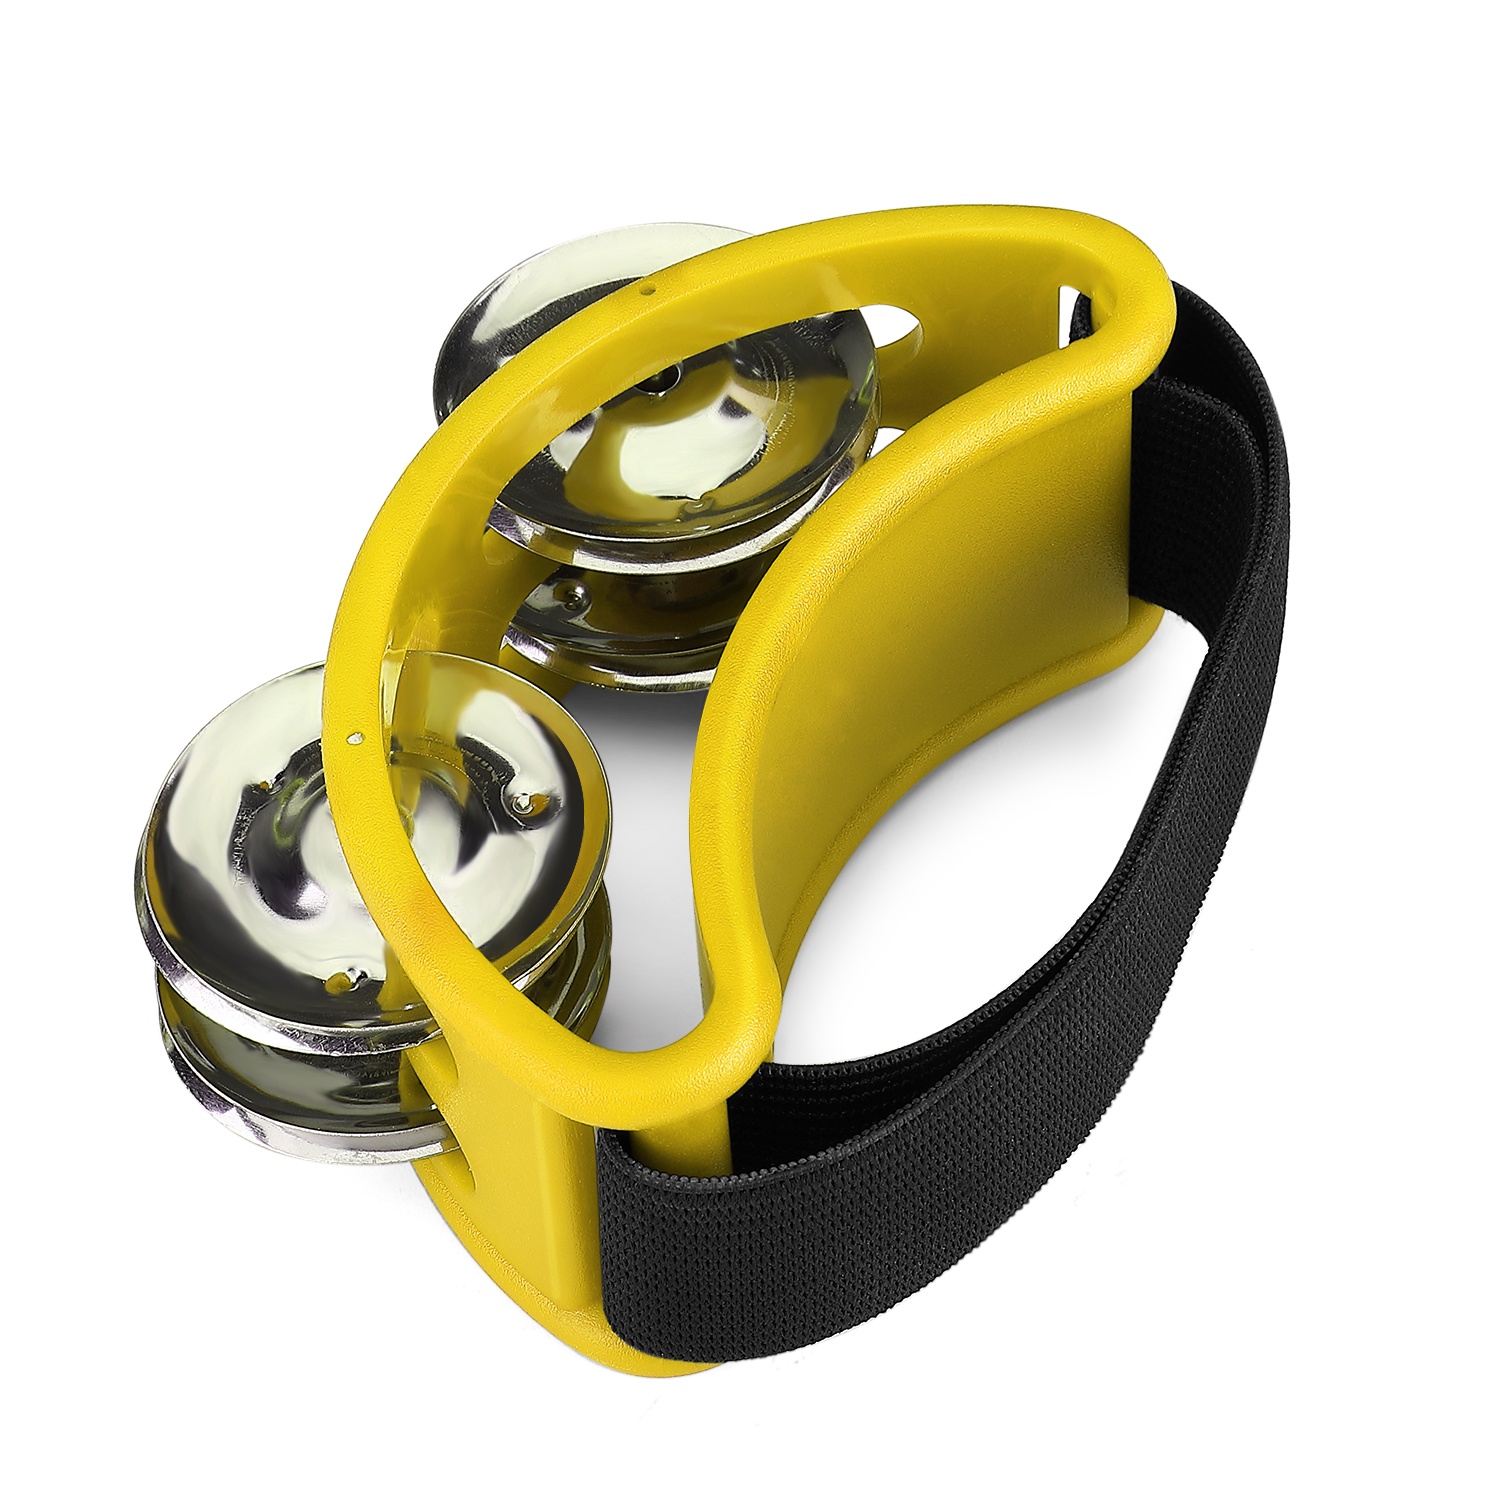 Foot Tambourine Percussion with Double Row Steel Jingles - Foot Shaker Musical Instrument Drum for Kids KTV Party Shoes Toy Gift Singer Vocalists Cajon & Guitar Players (Yellow) - image 3 of 7